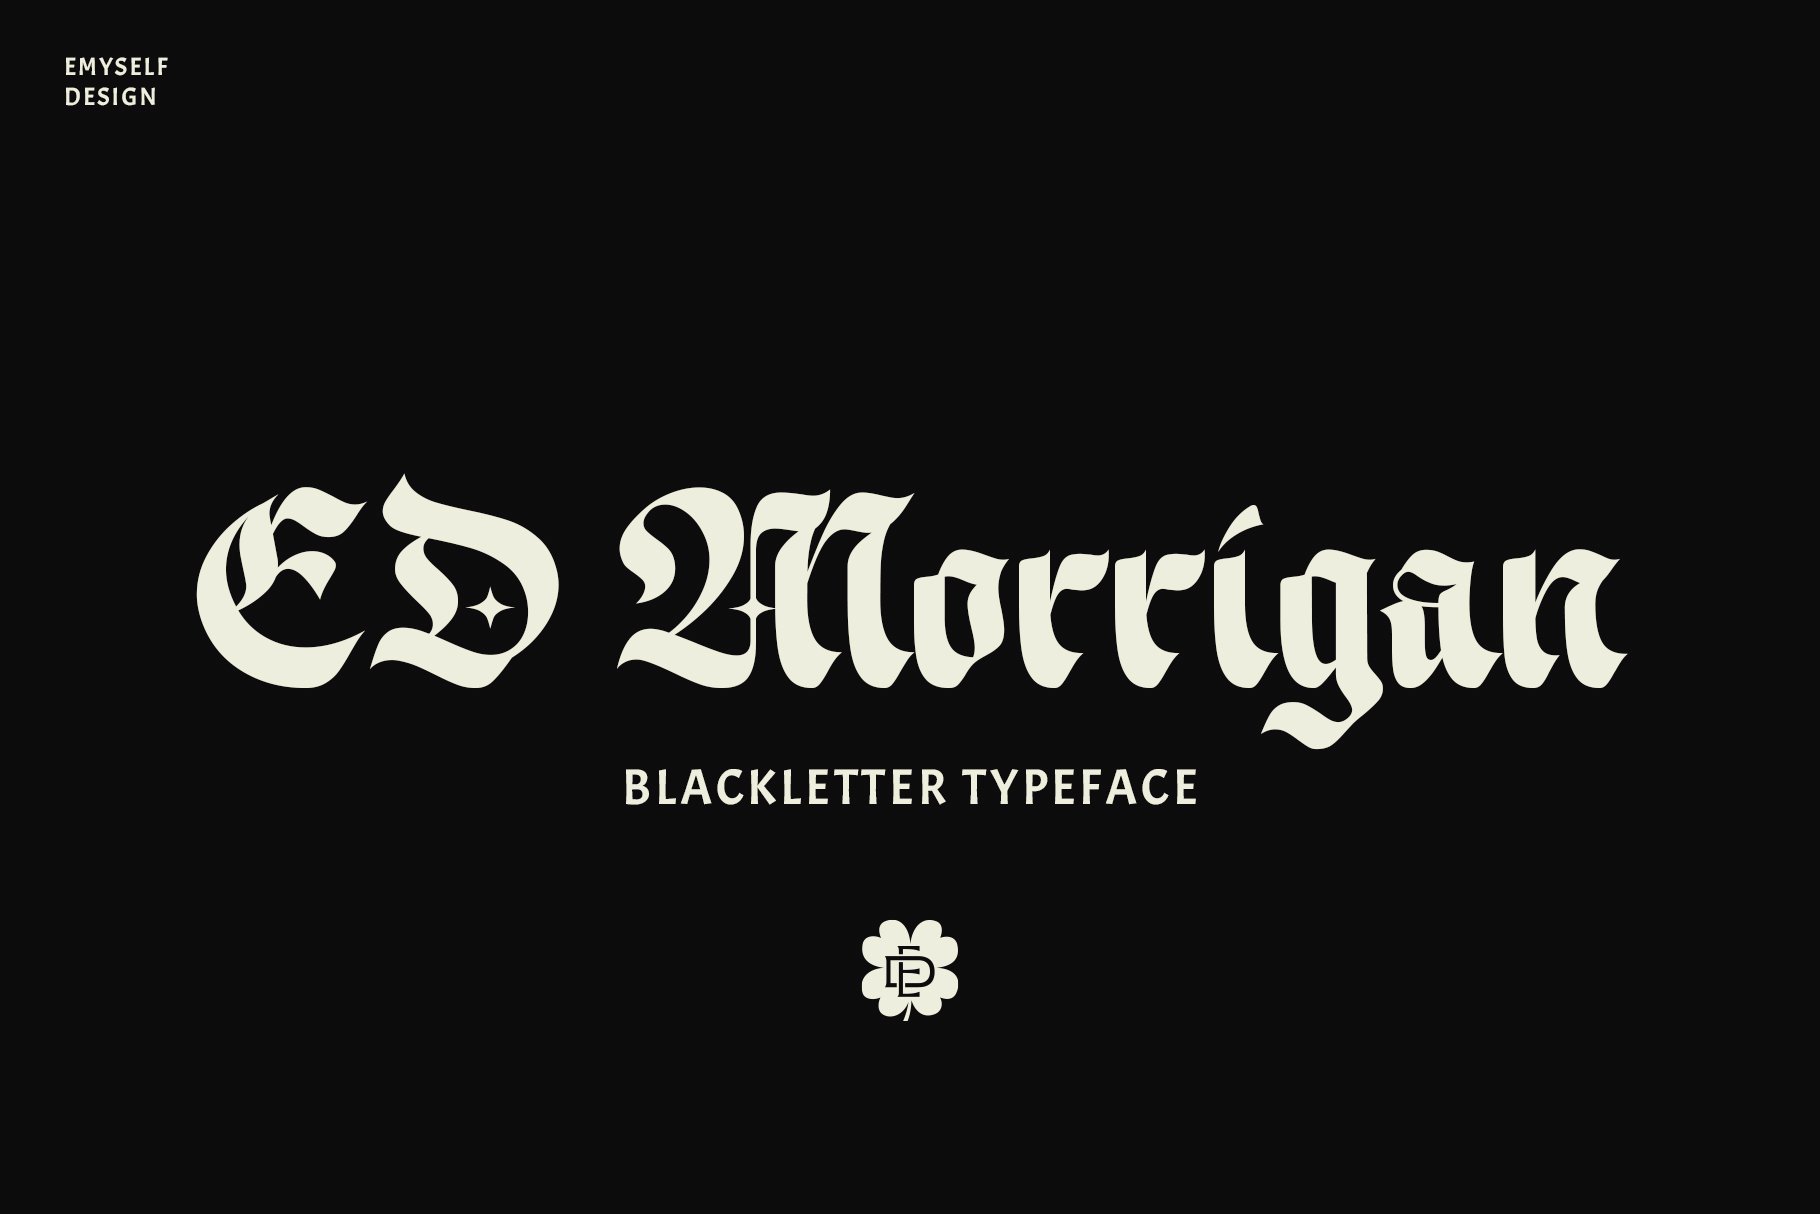 ED Morrigan Typeface cover image.